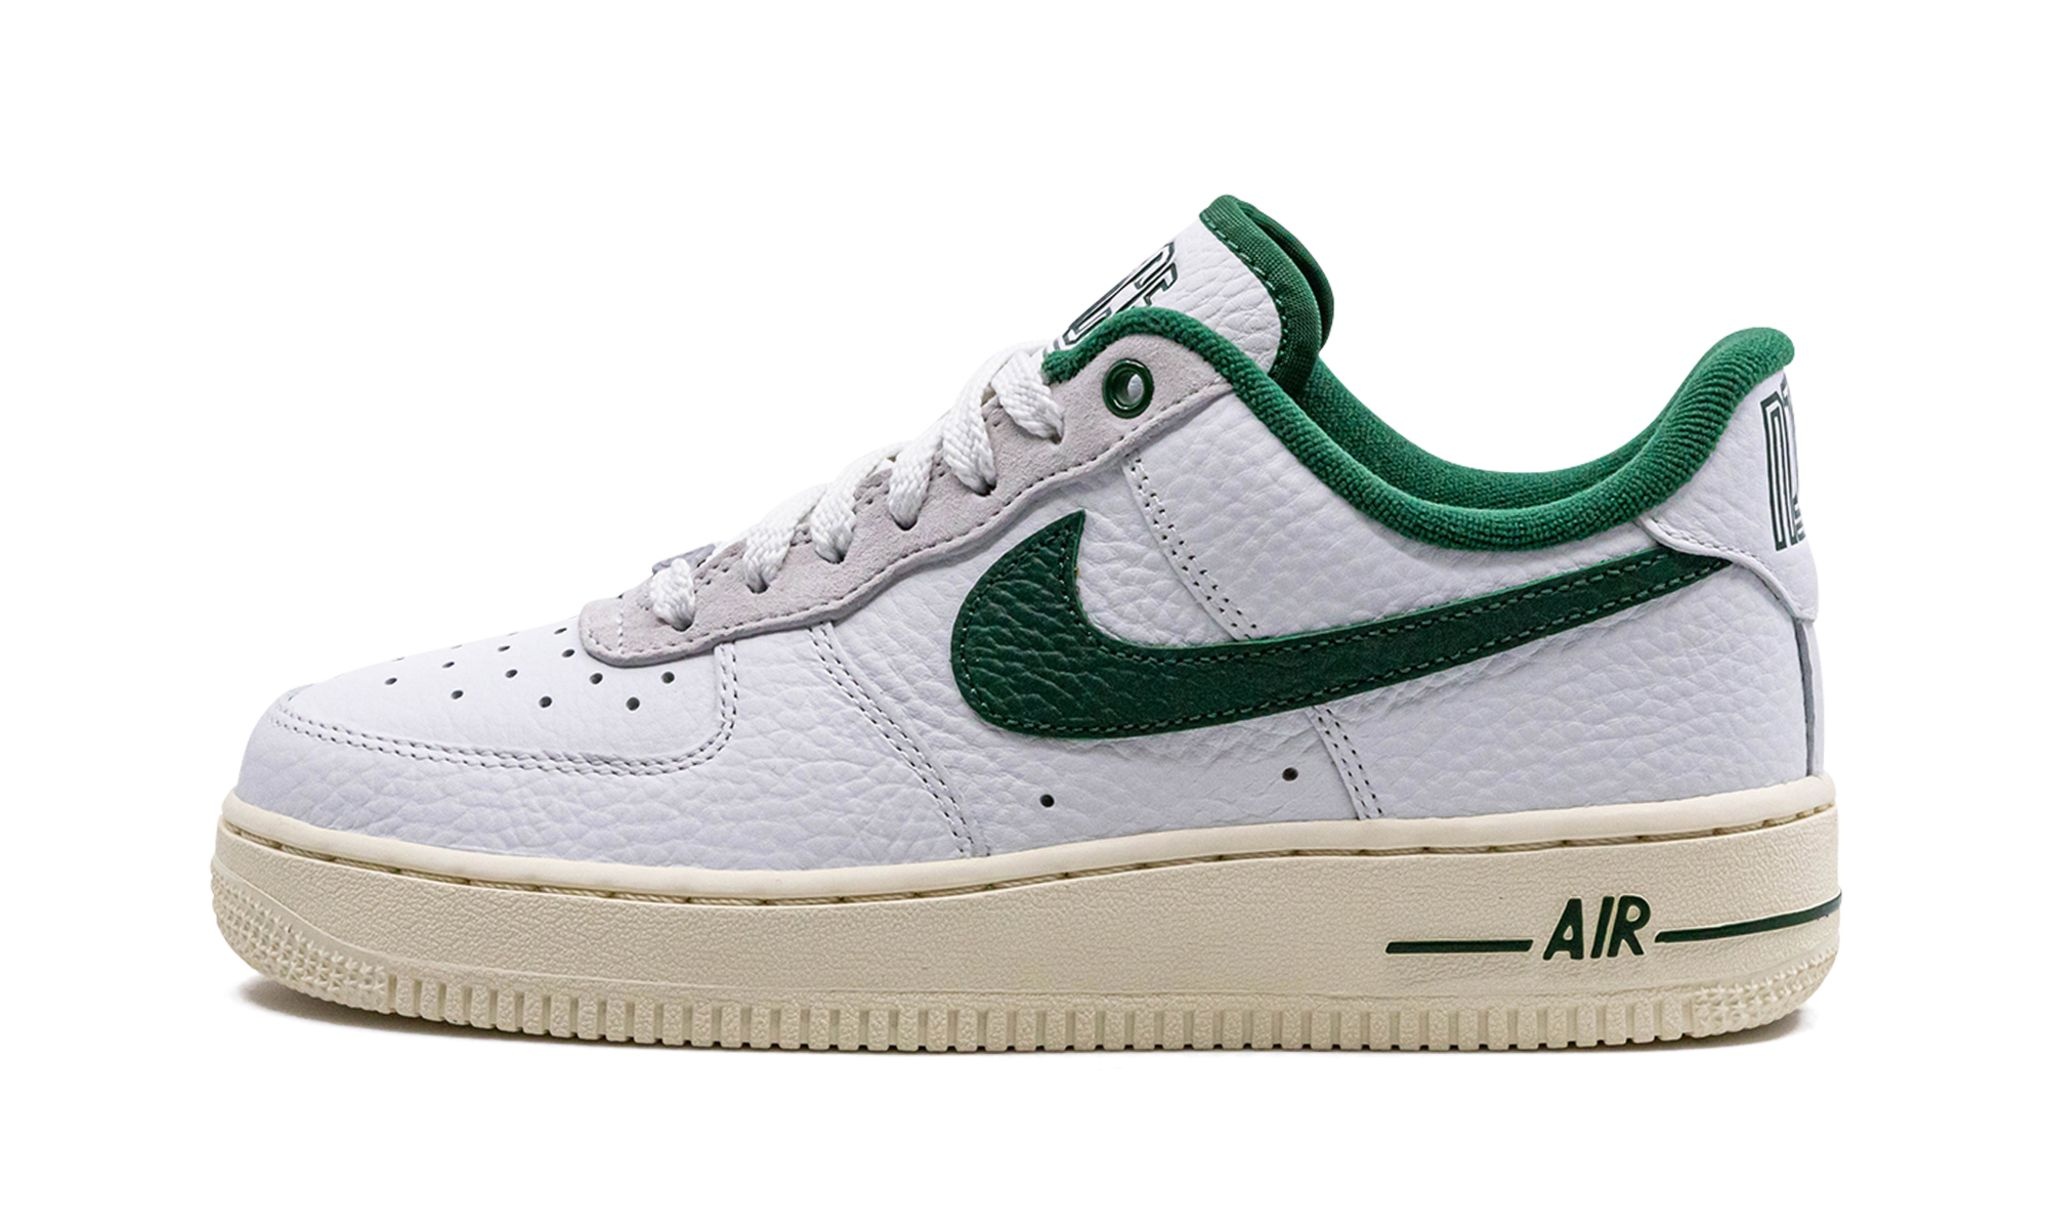 Nike Air Force 1 Low '07 LX WMNS "Command Force Gorge Green" - 1